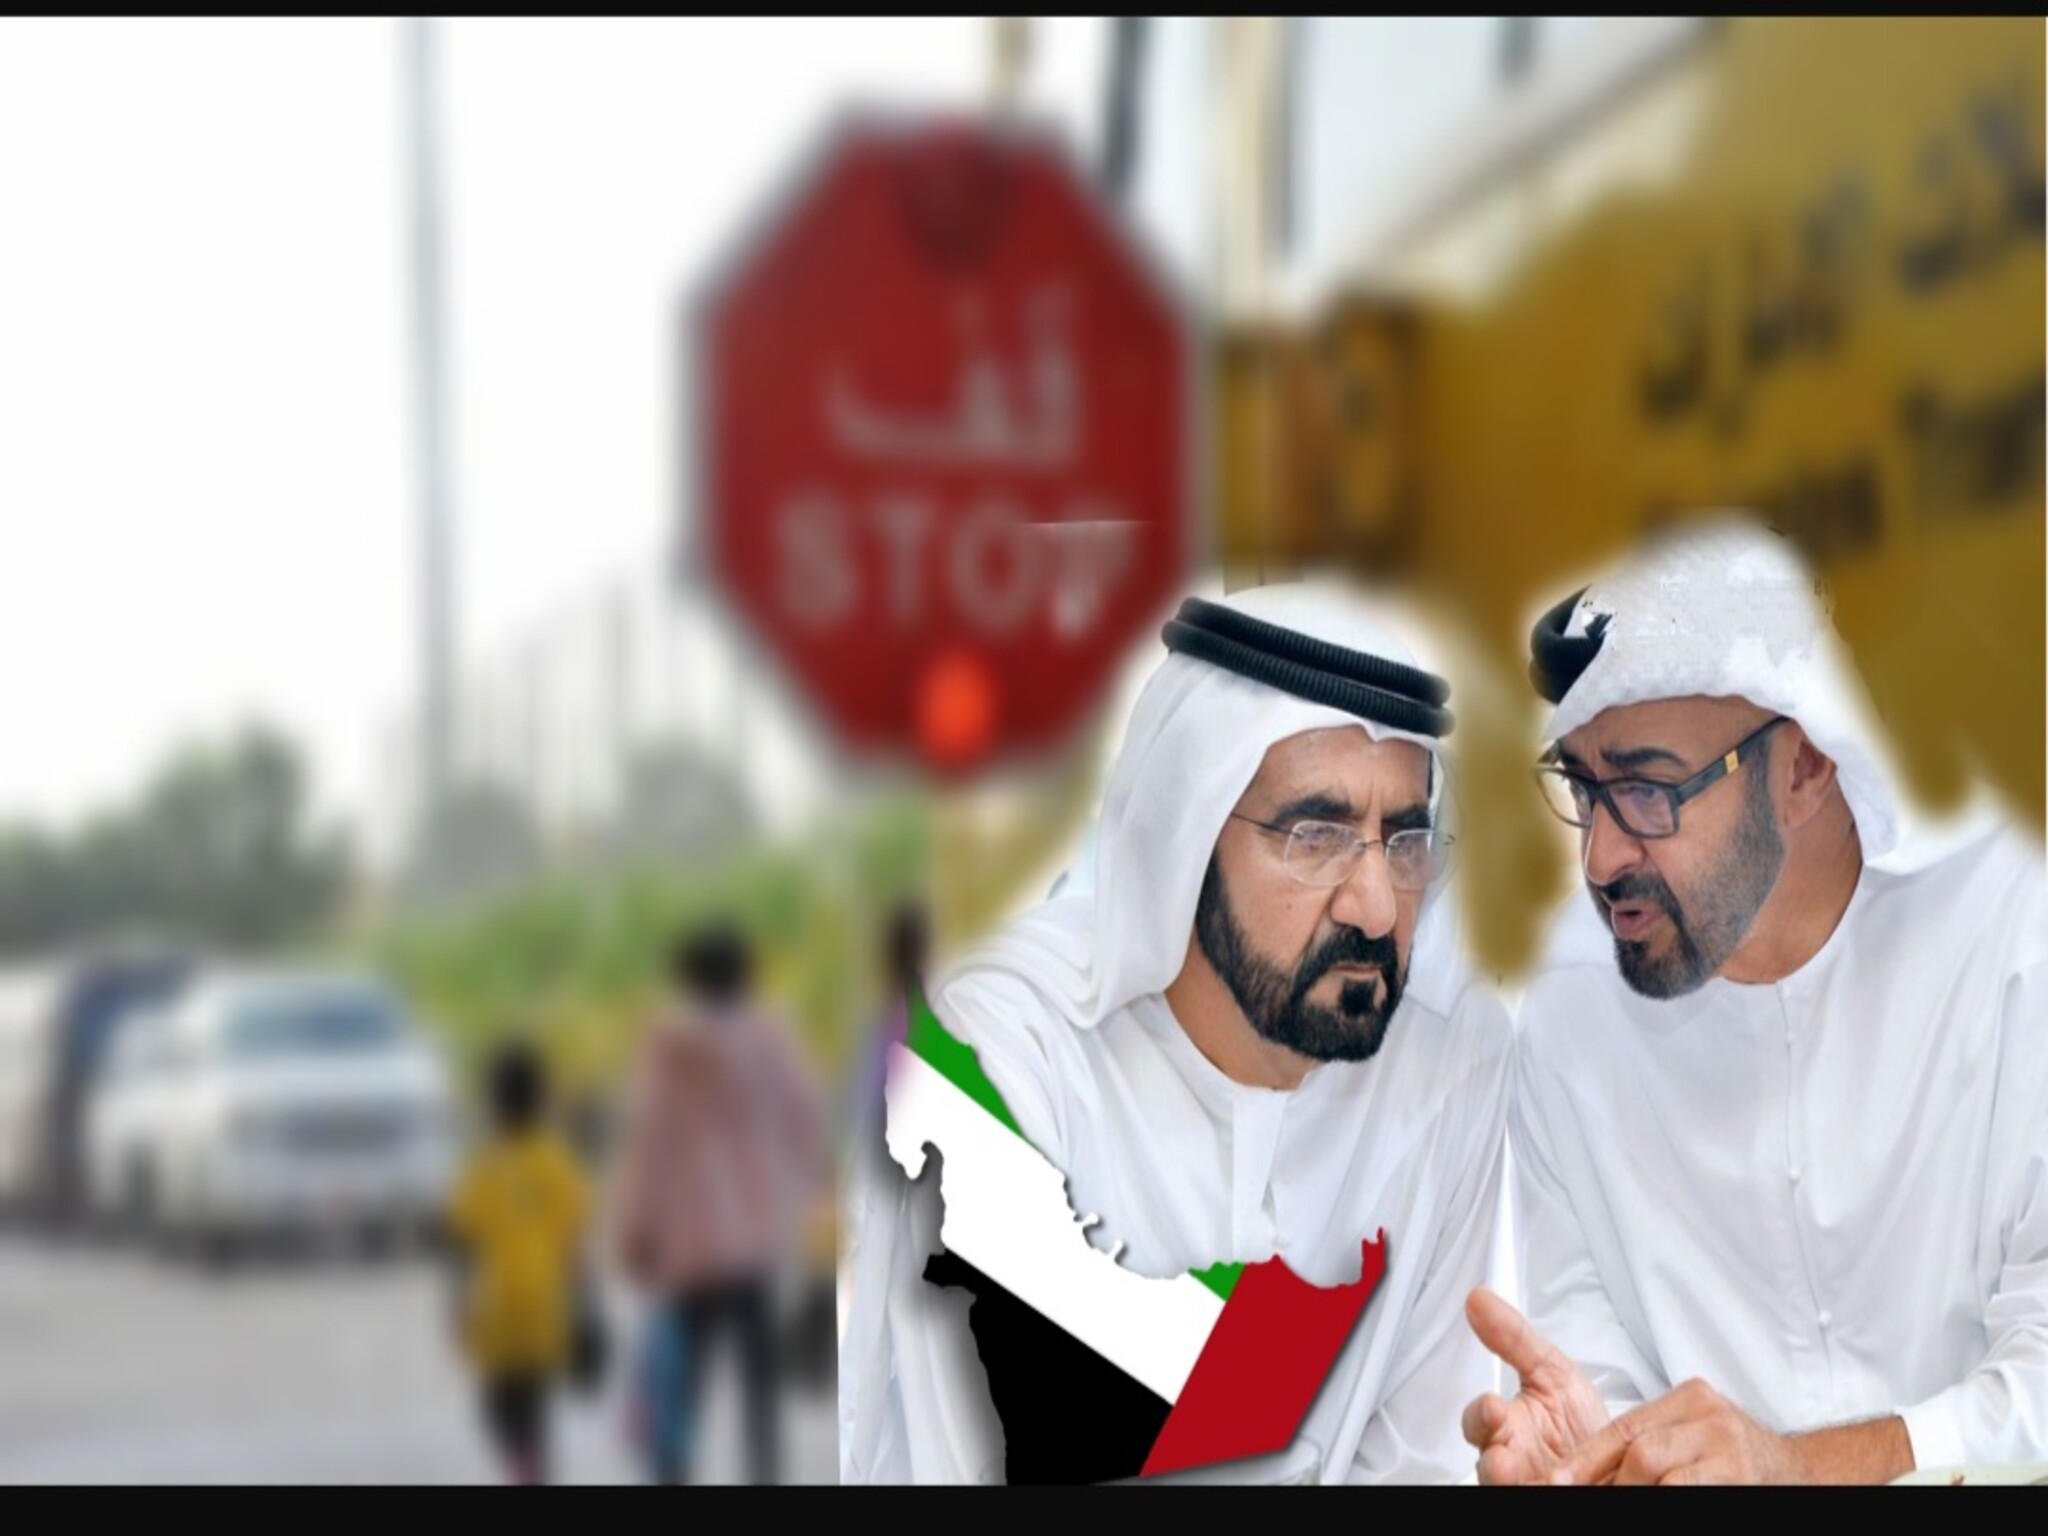 The UAE President ordered the payment of school fees for students in many schools.